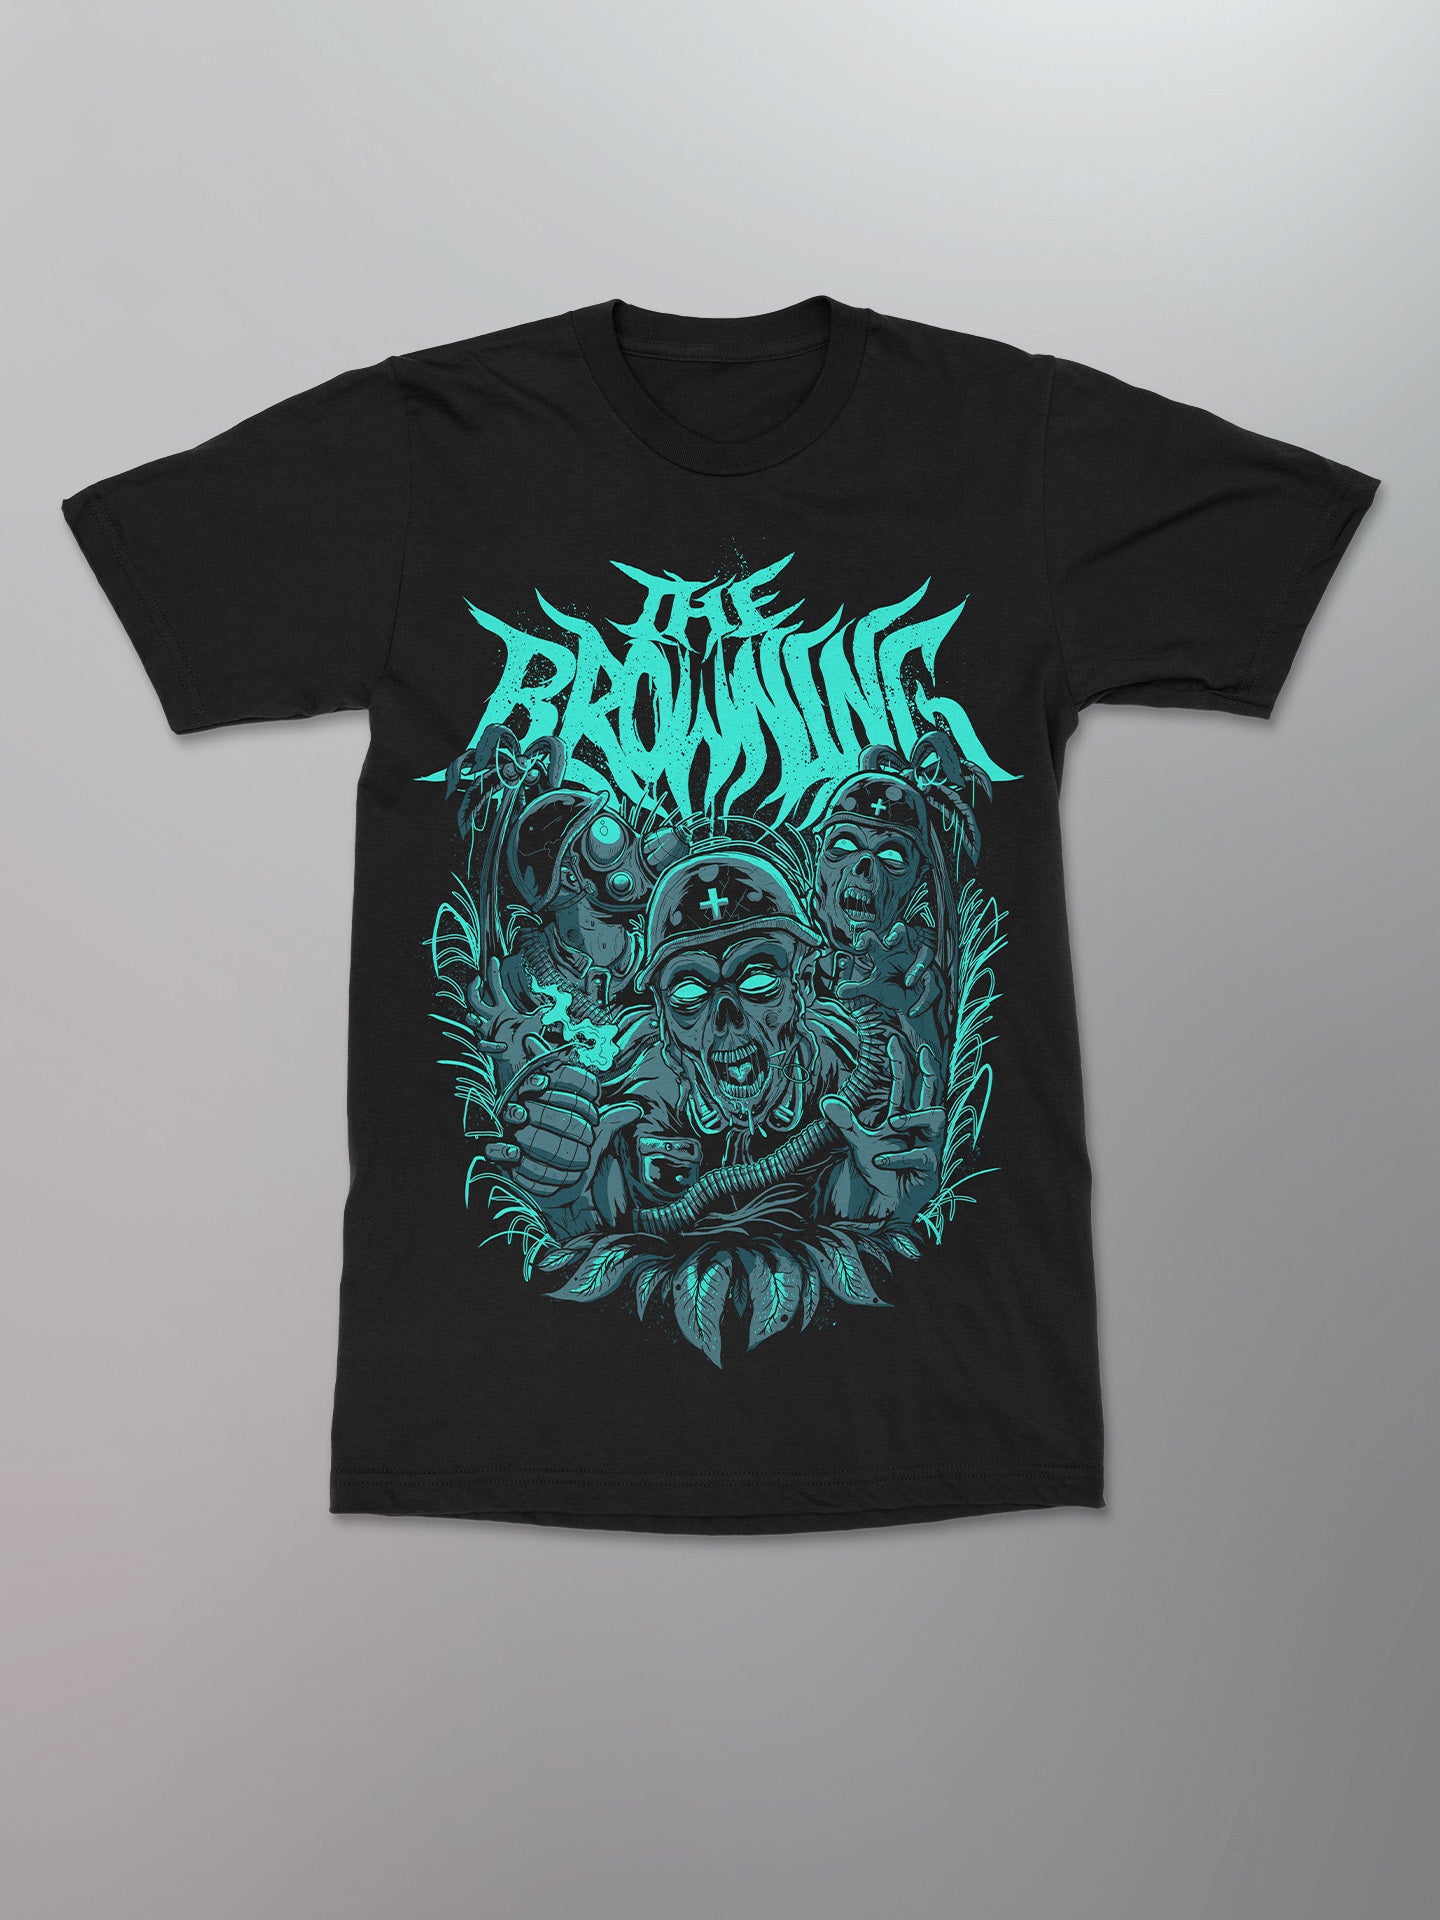 The Browning - Zombie Soldiers Shirt